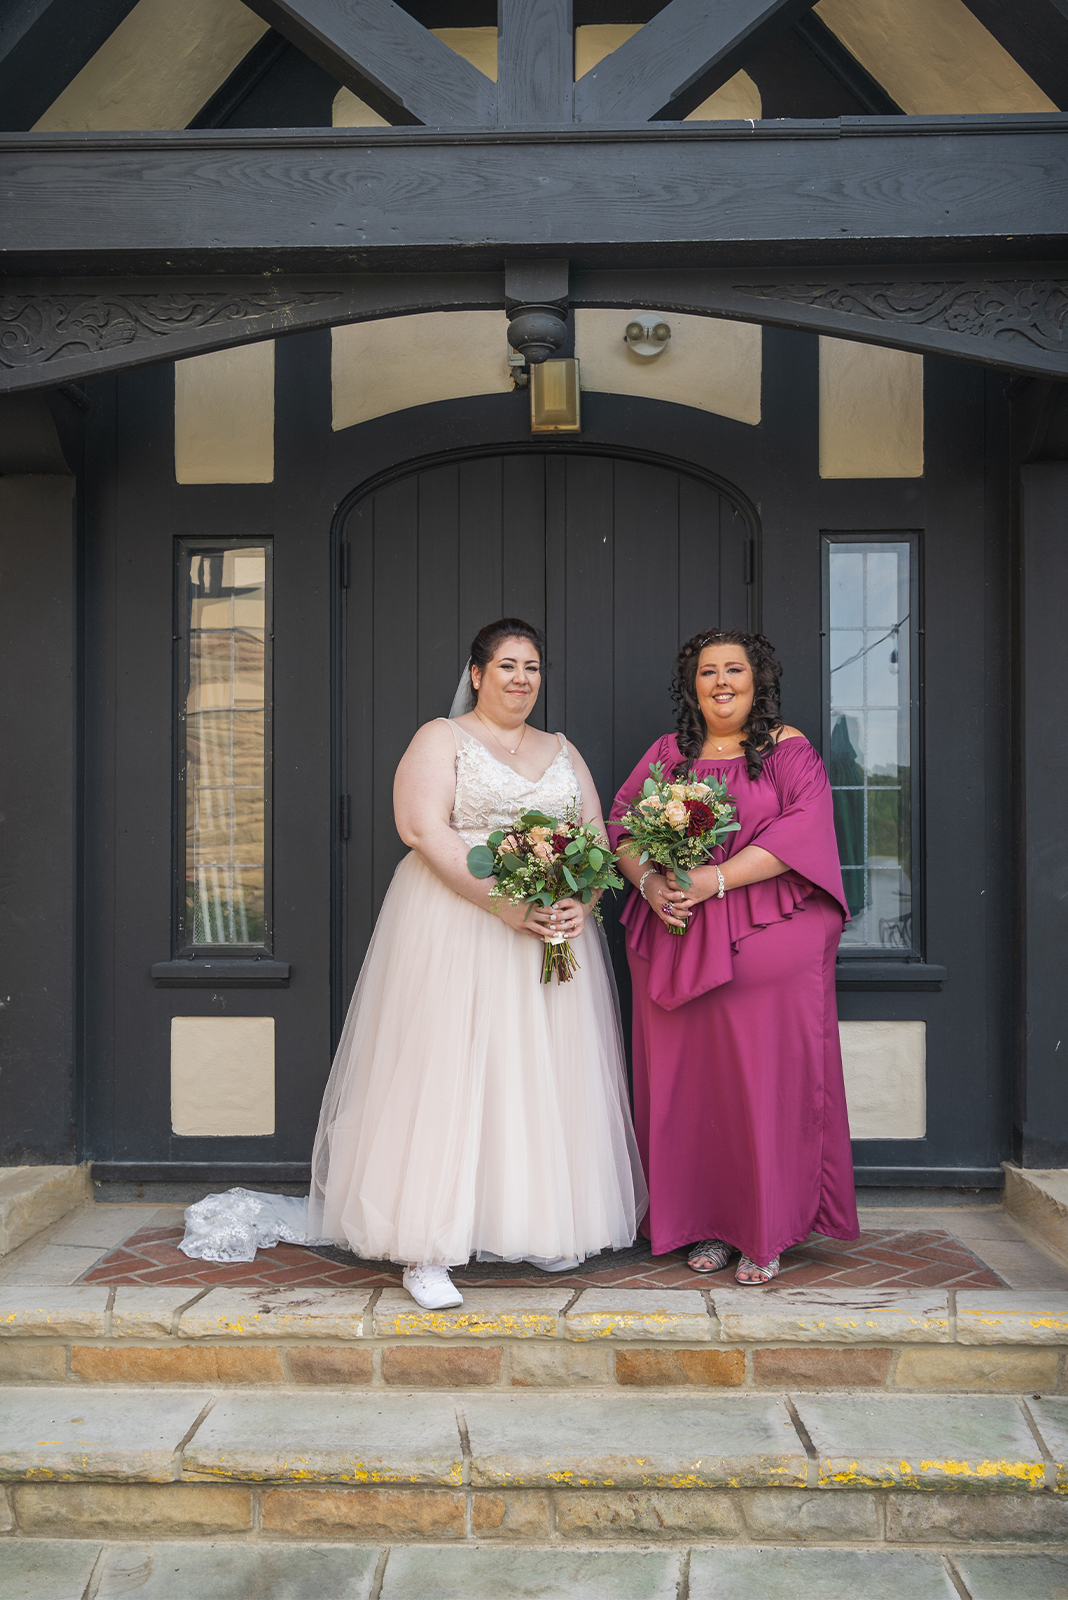 Bride and bridesmaid, bridal party portrait, outdoor September wedding ceremony at Punderson Manor Lodge & Conference Center, Newbury Township OH